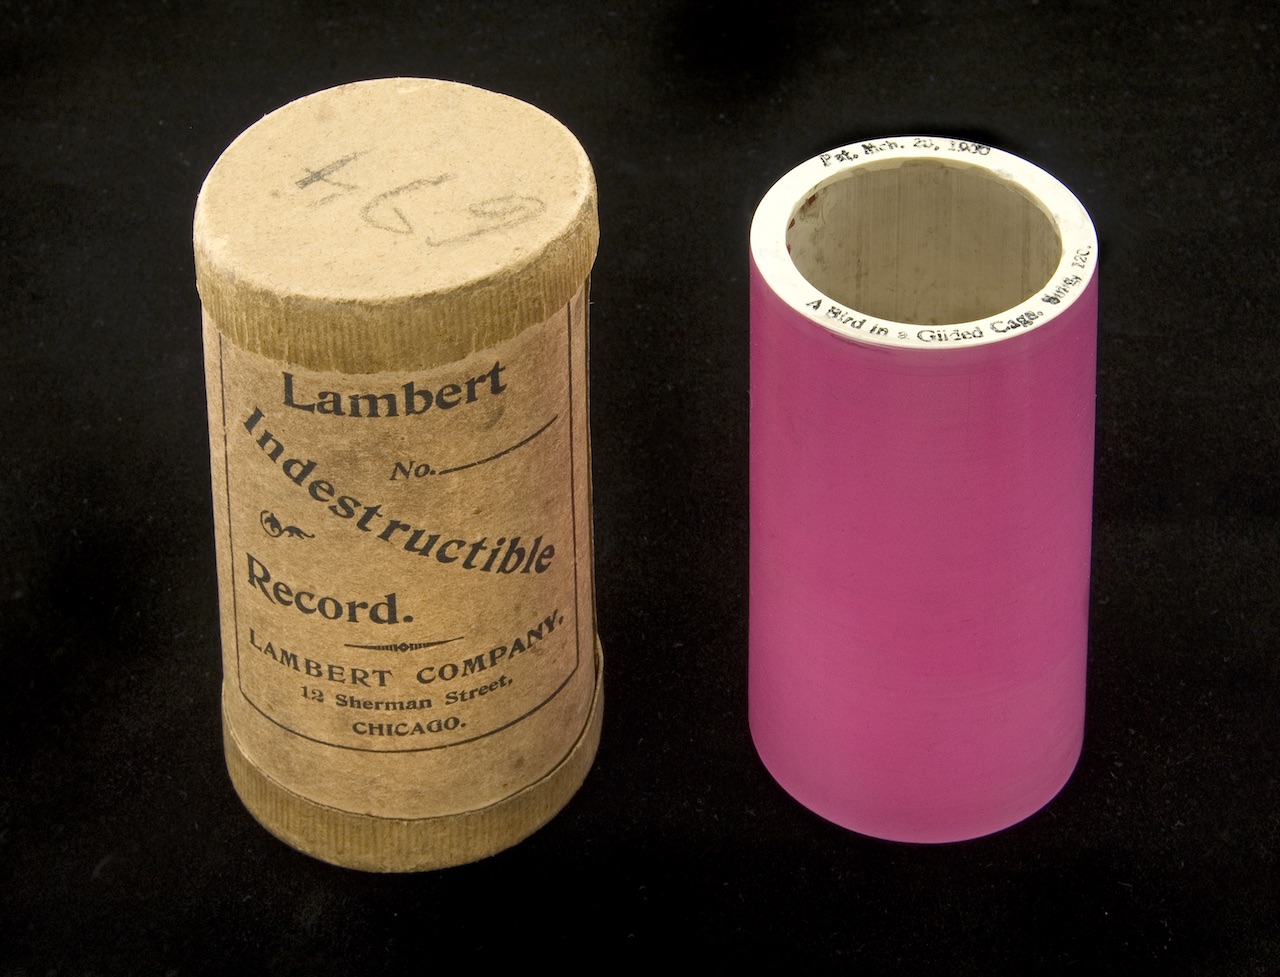 Lambert cylinder featuring "A bird in a gilded cage," possibly by Joe Natus.